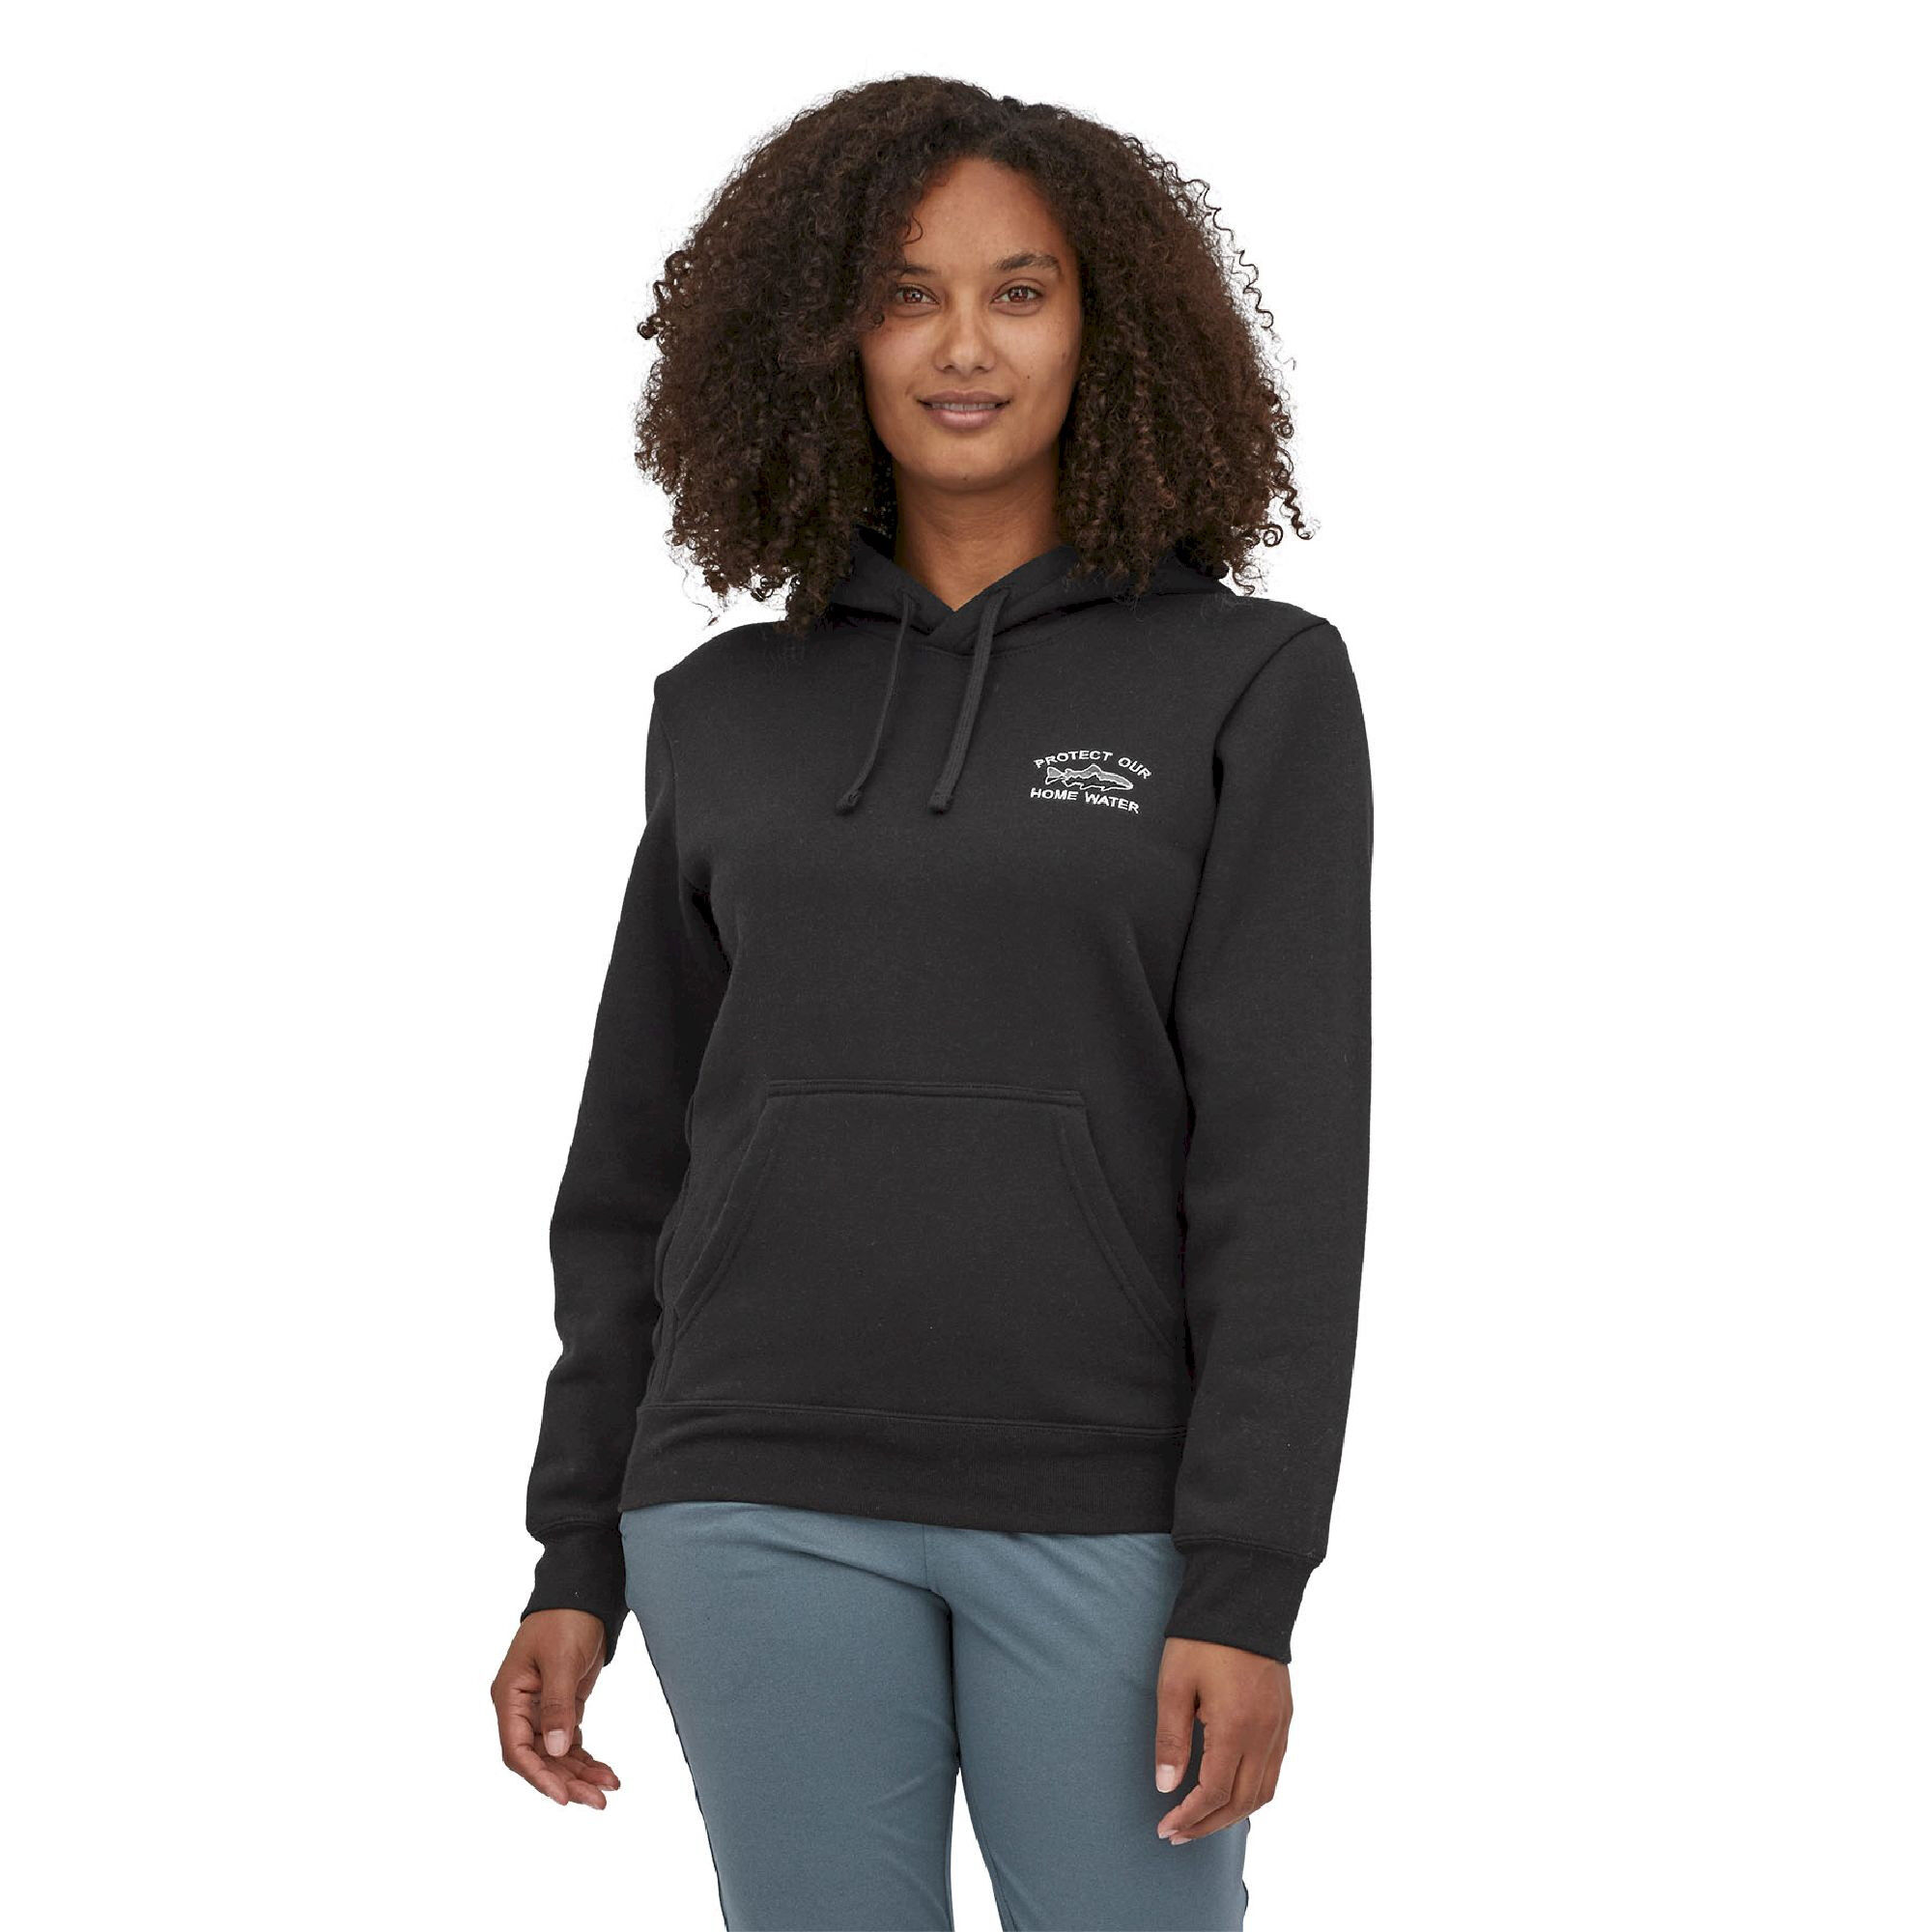 Patagonia Home Water Trout Uprisal Hoody - Sweat à capuche | Hardloop